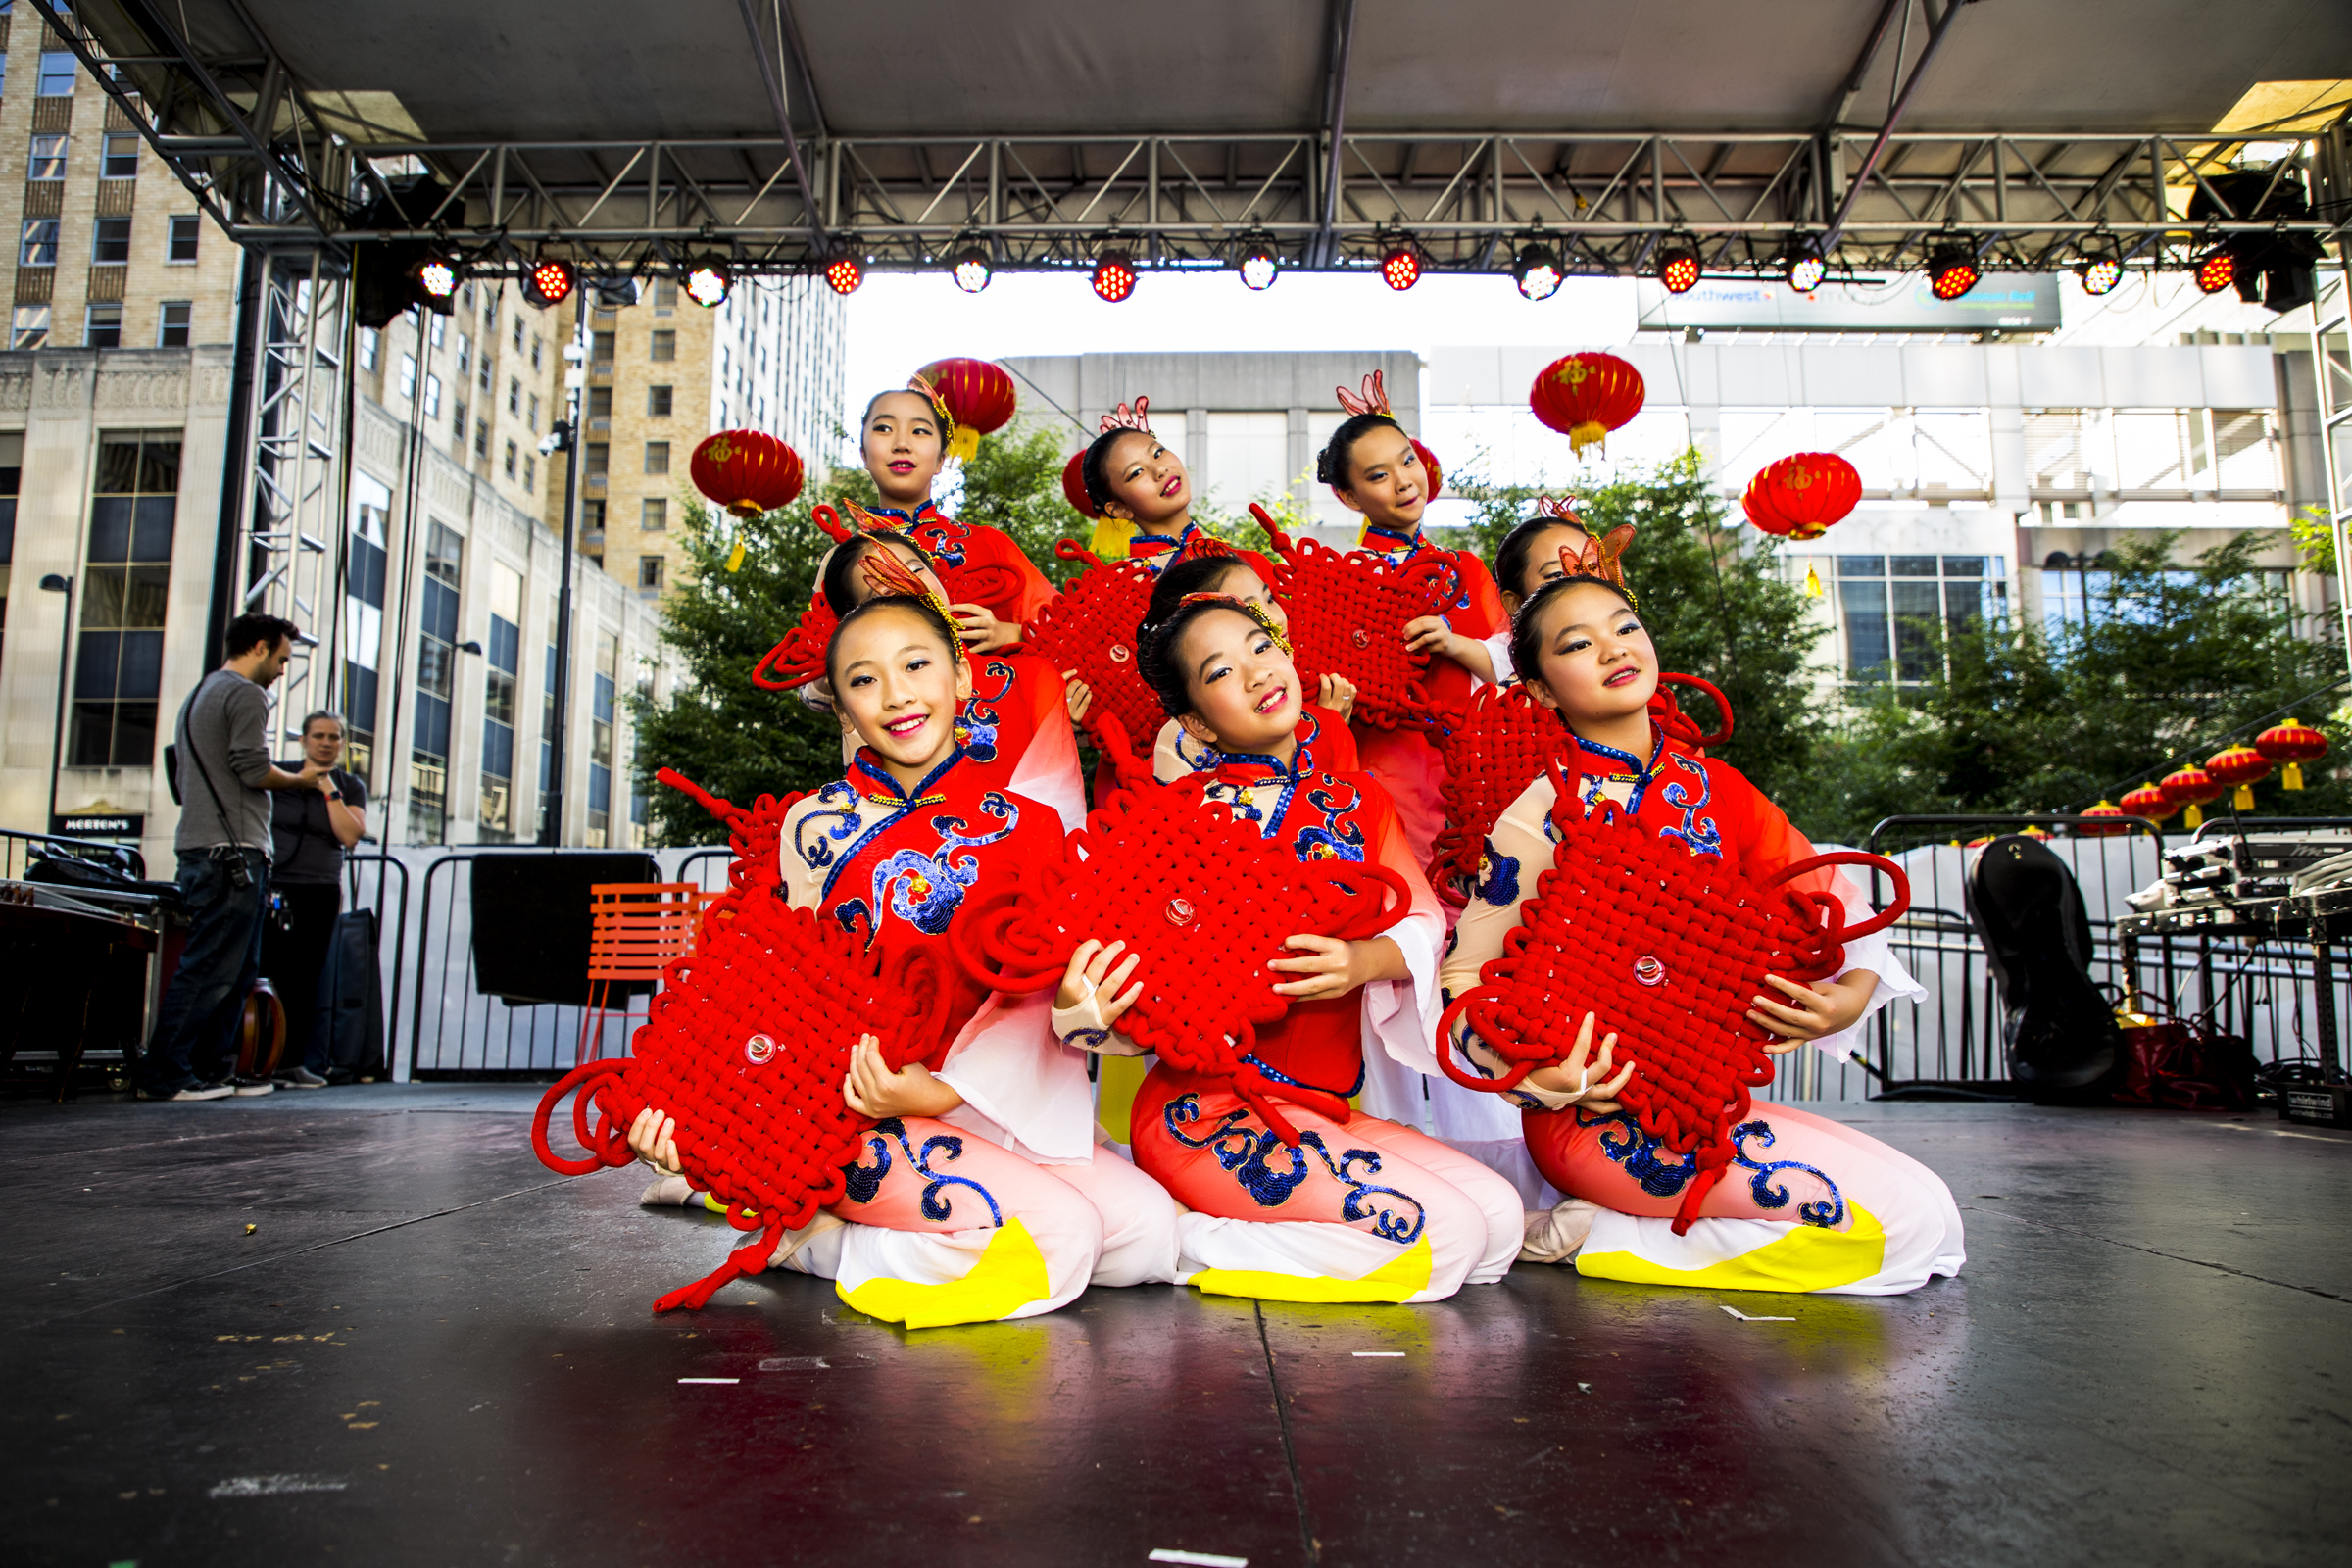 women performing at moon festival during on of cincinnati's many diverse festivals